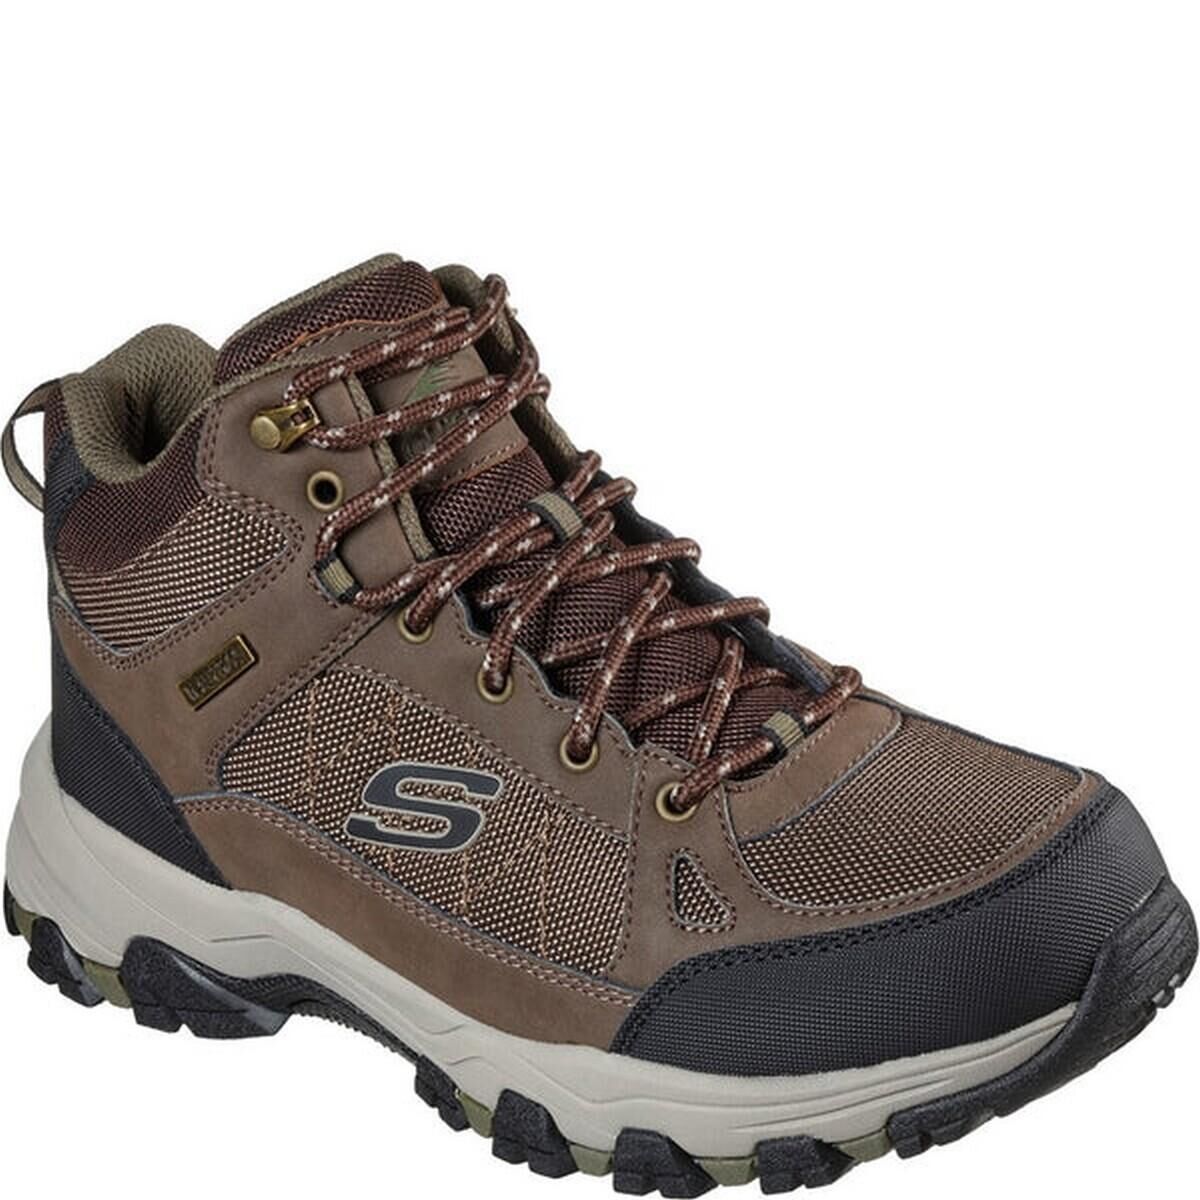 SKECHERS Mens Selmen Melano Leather Relaxed Fit Hiking Boots (Chocolate)